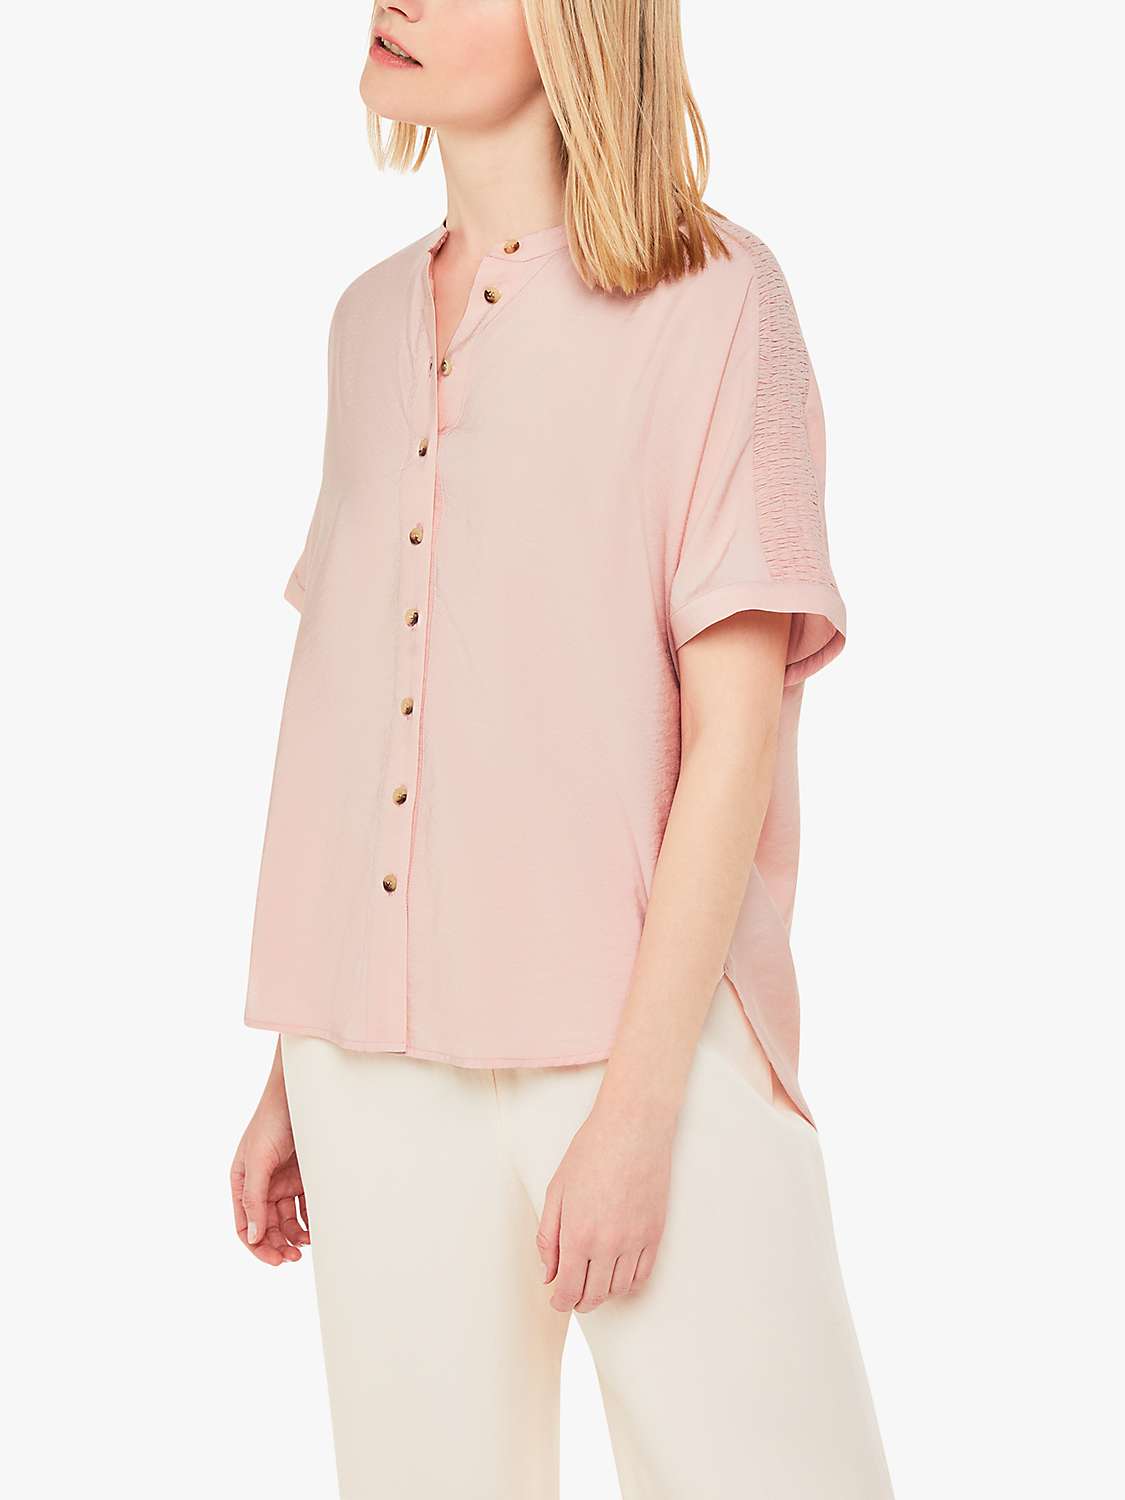 Buy Whistles Maisie Shirred Sleeve Blouse Online at johnlewis.com